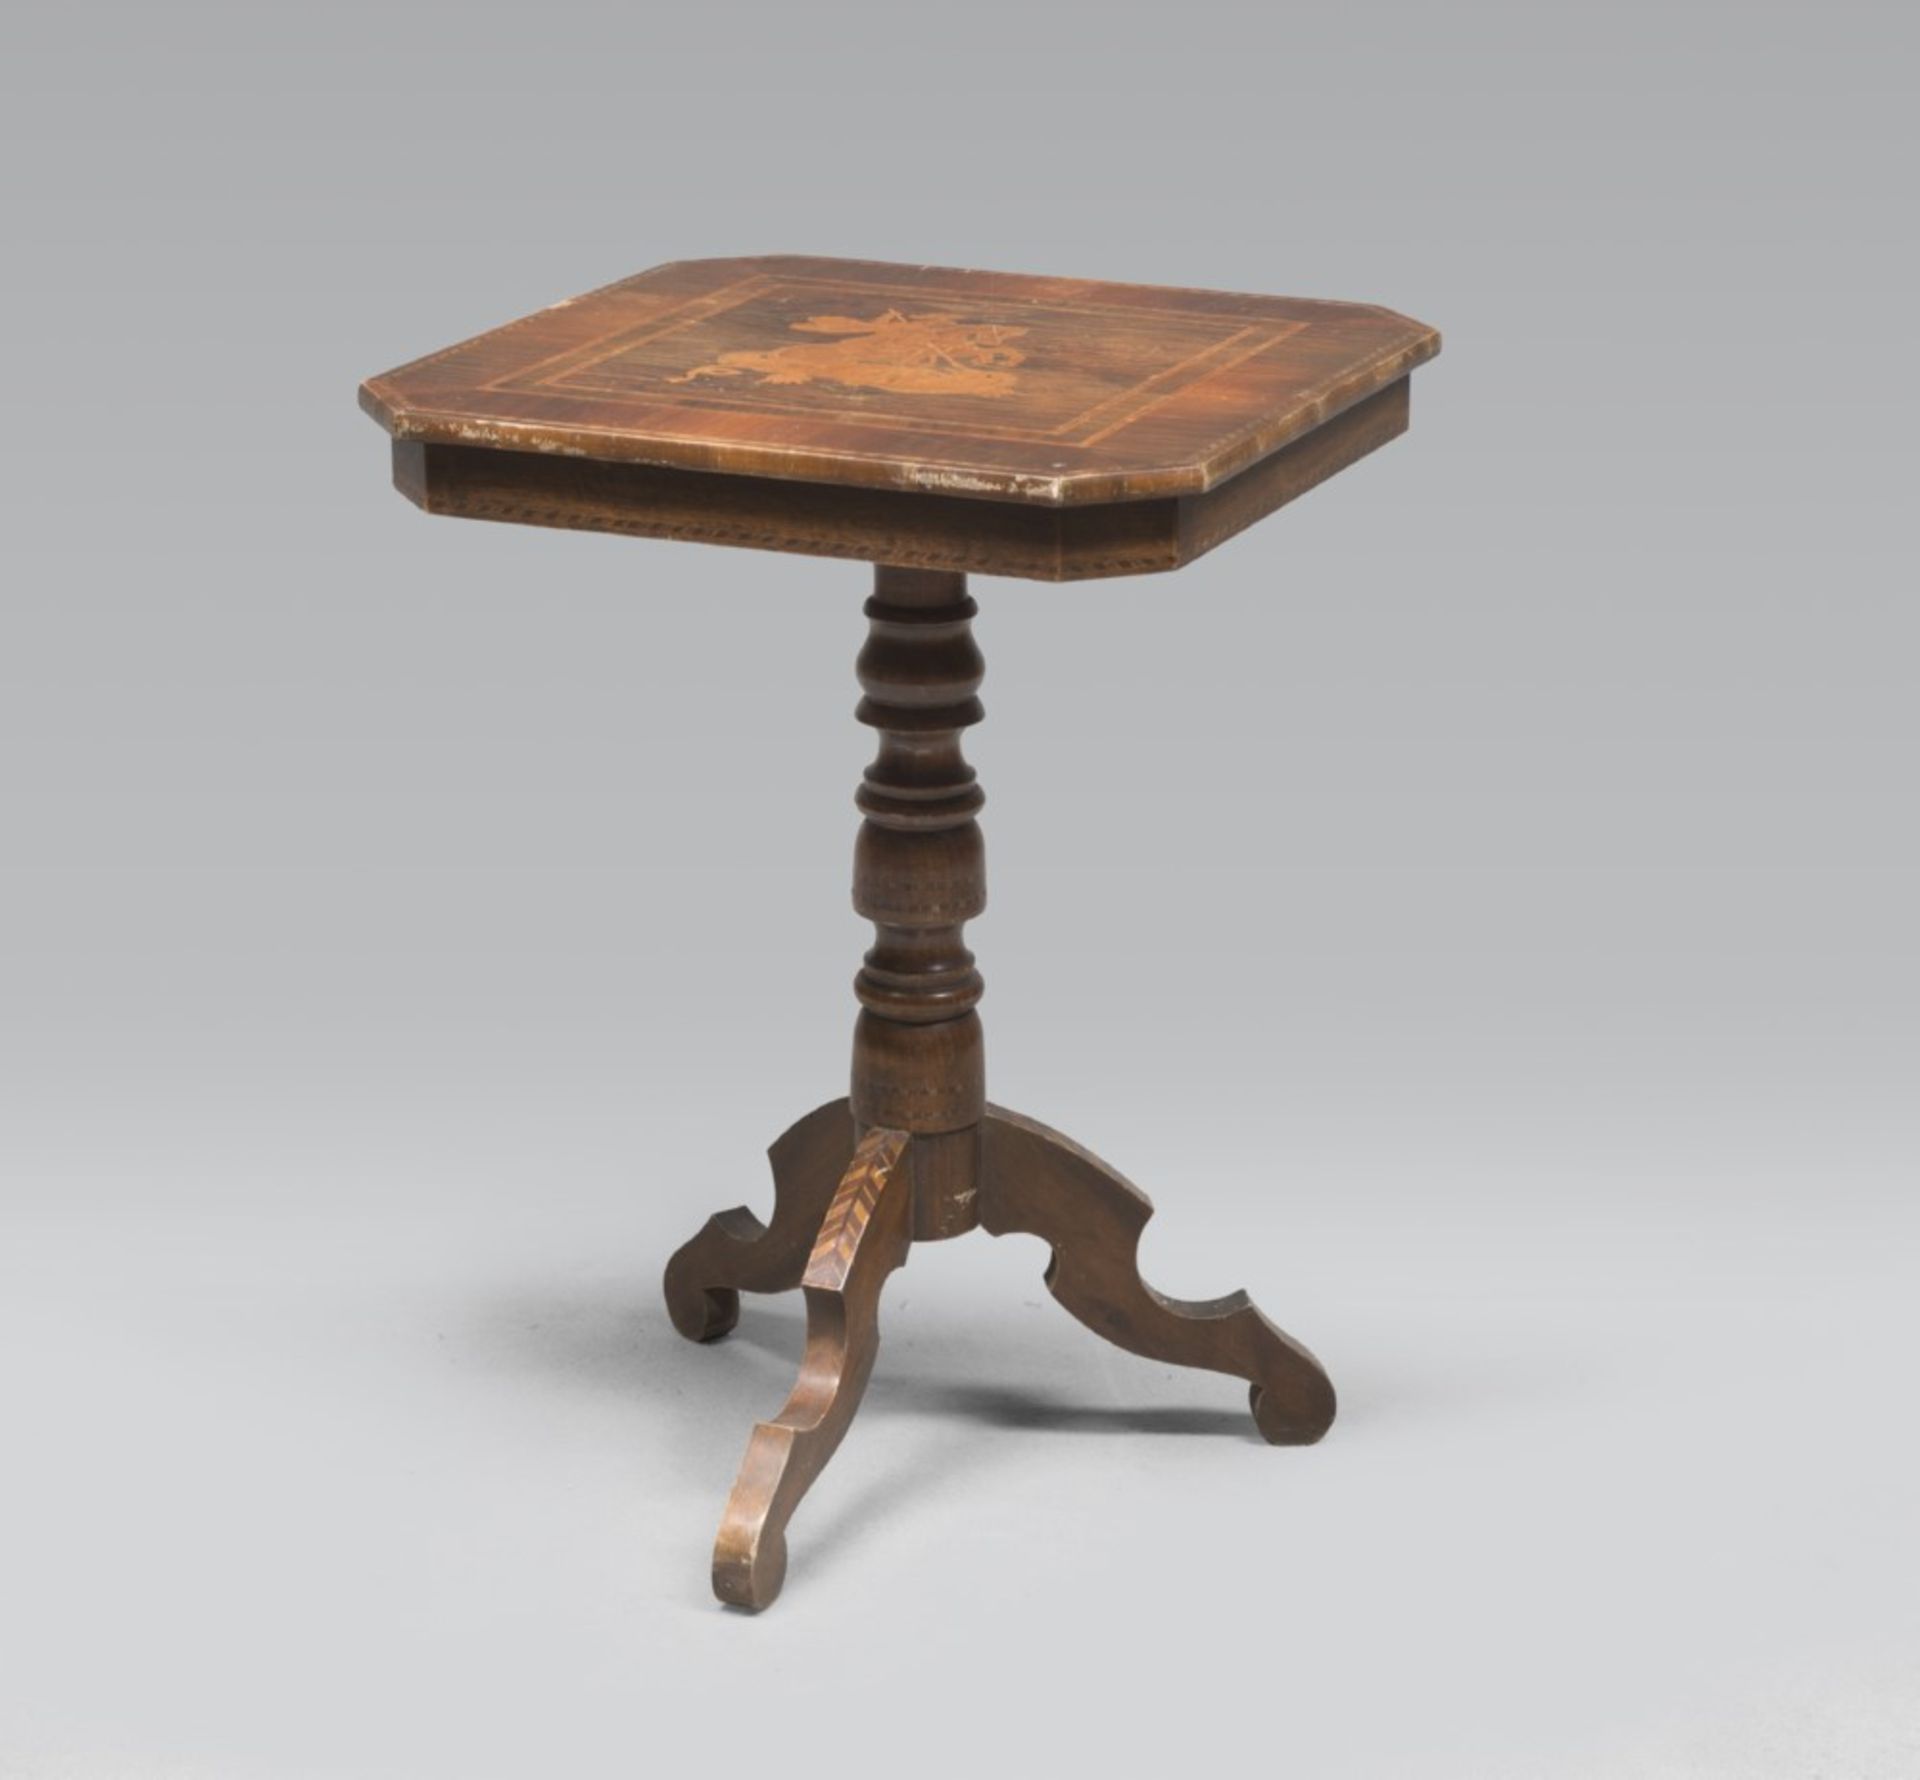 SMALL EBONY PURPLE TABLE, SORRENTO 19TH CENTURY with boxwood inlaid with Saint George and the